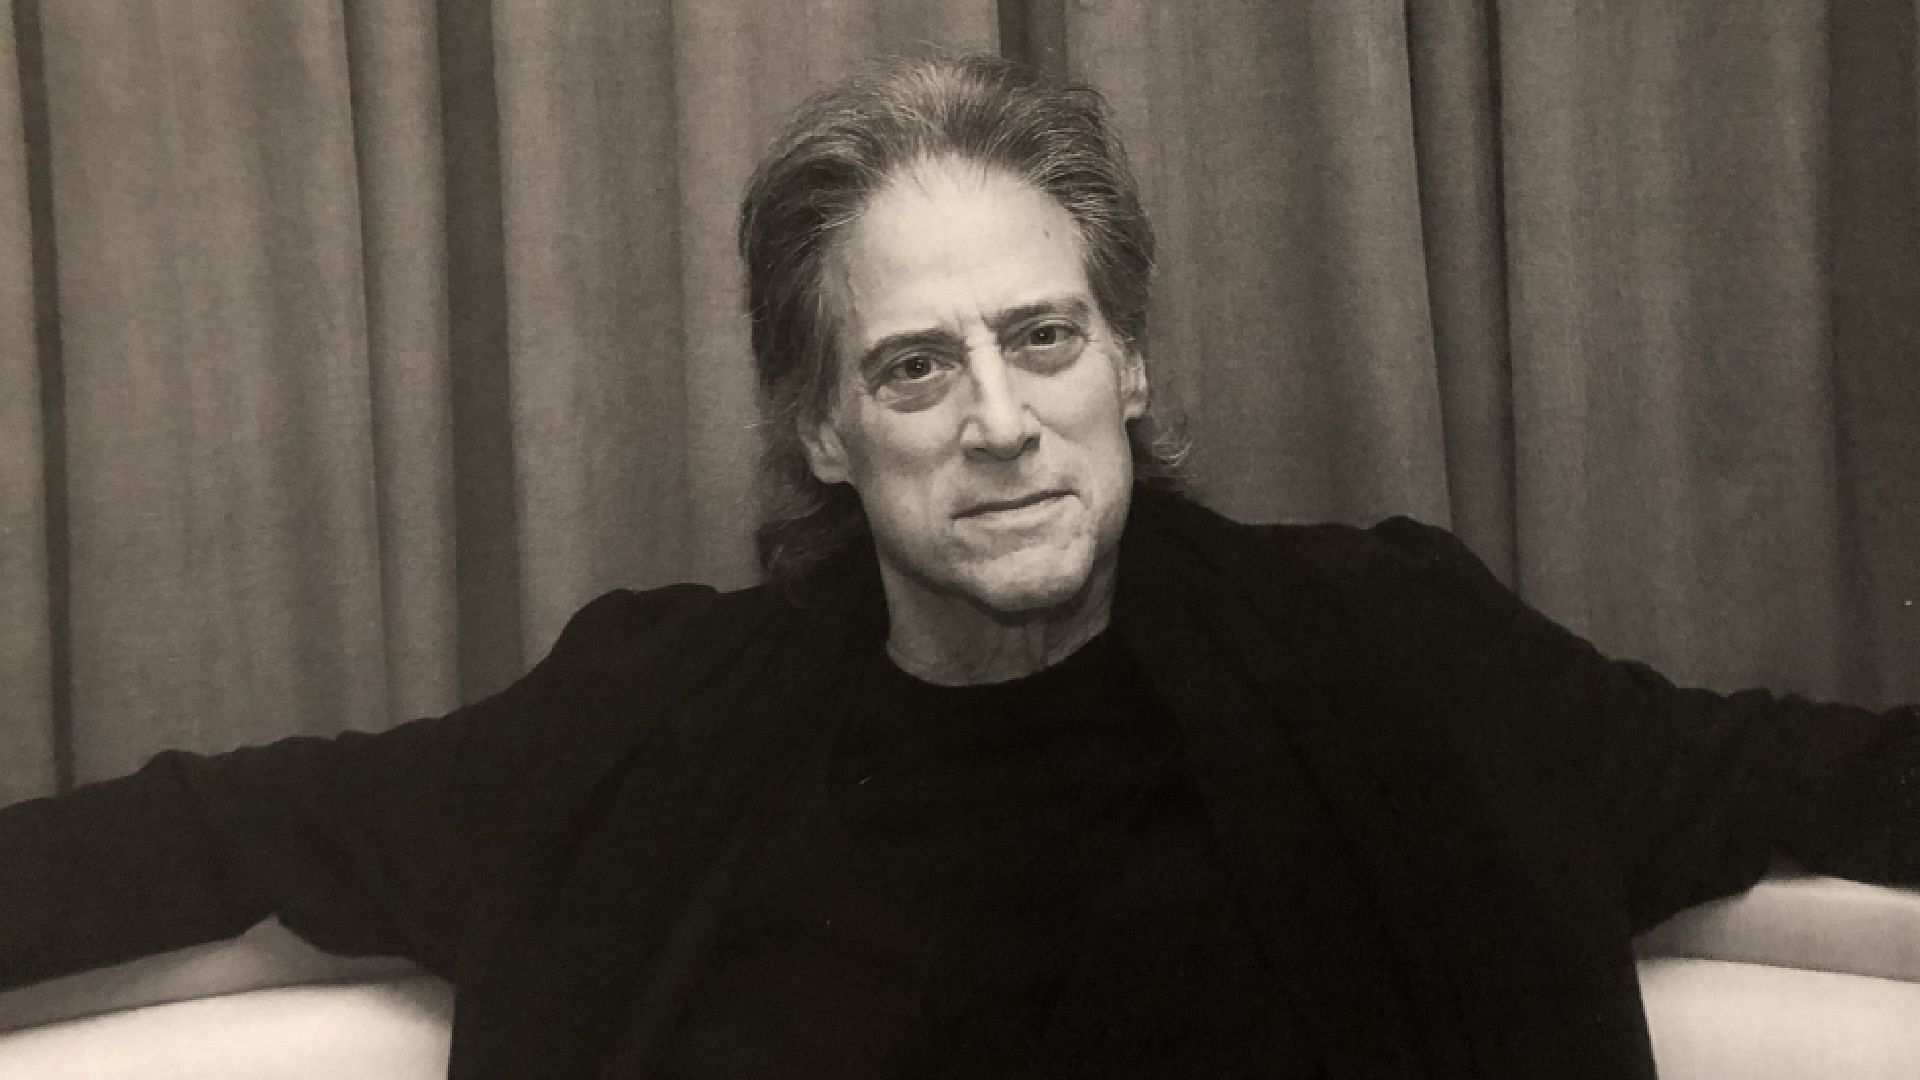 Richard Lewis has passed away at 76 (Image via AllinLewis/WikiMedia Commons)